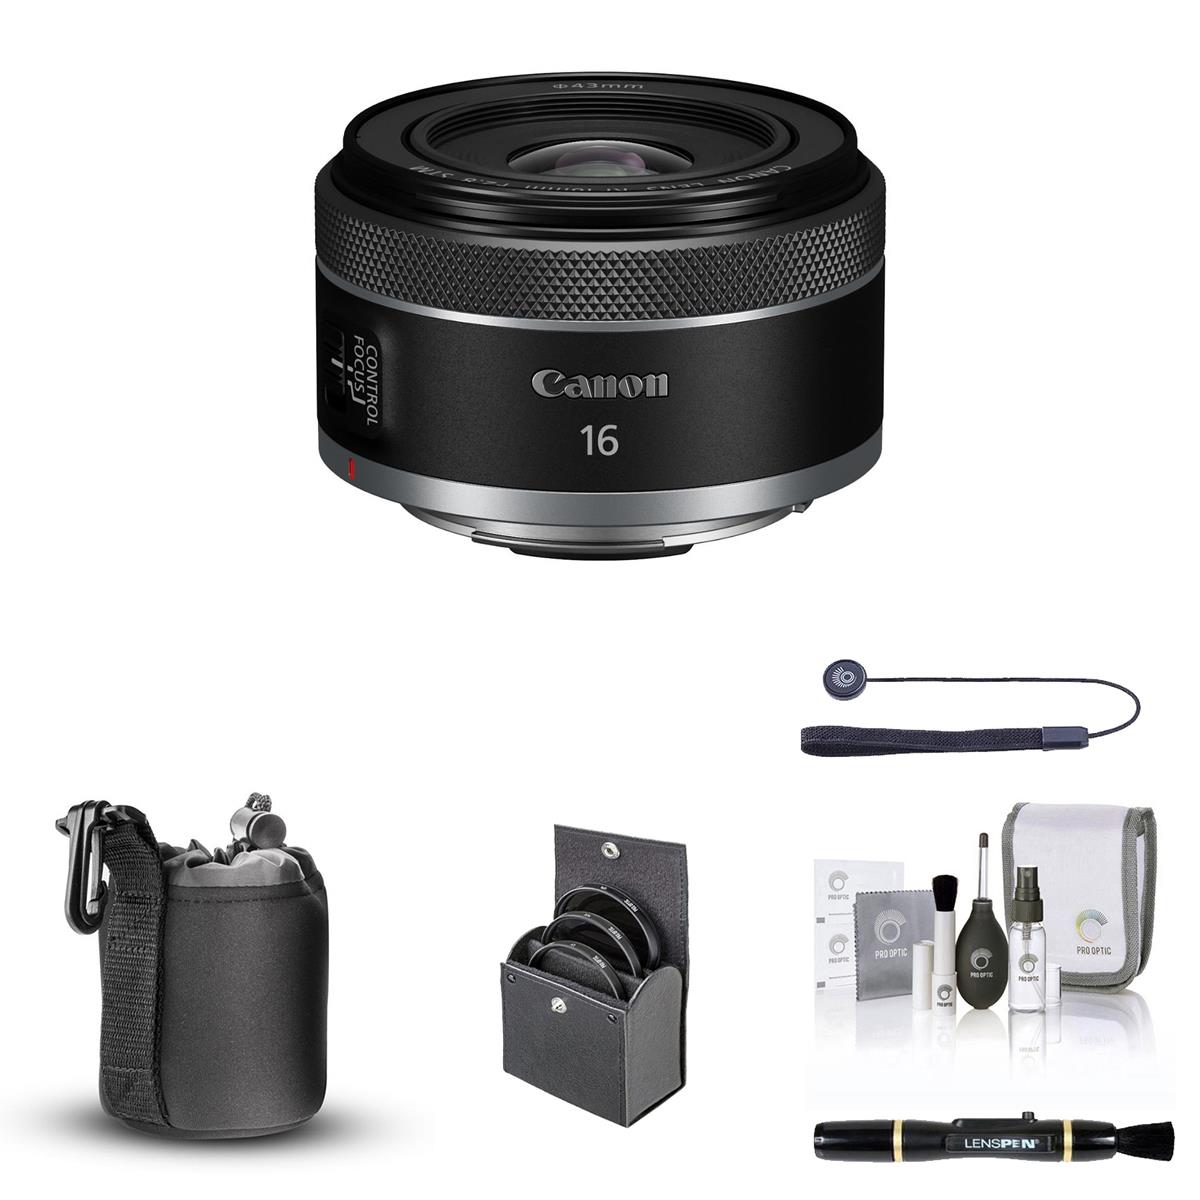 Image of Canon RF 16mm f/2.8 STM Lens with Essential Accessories Kit